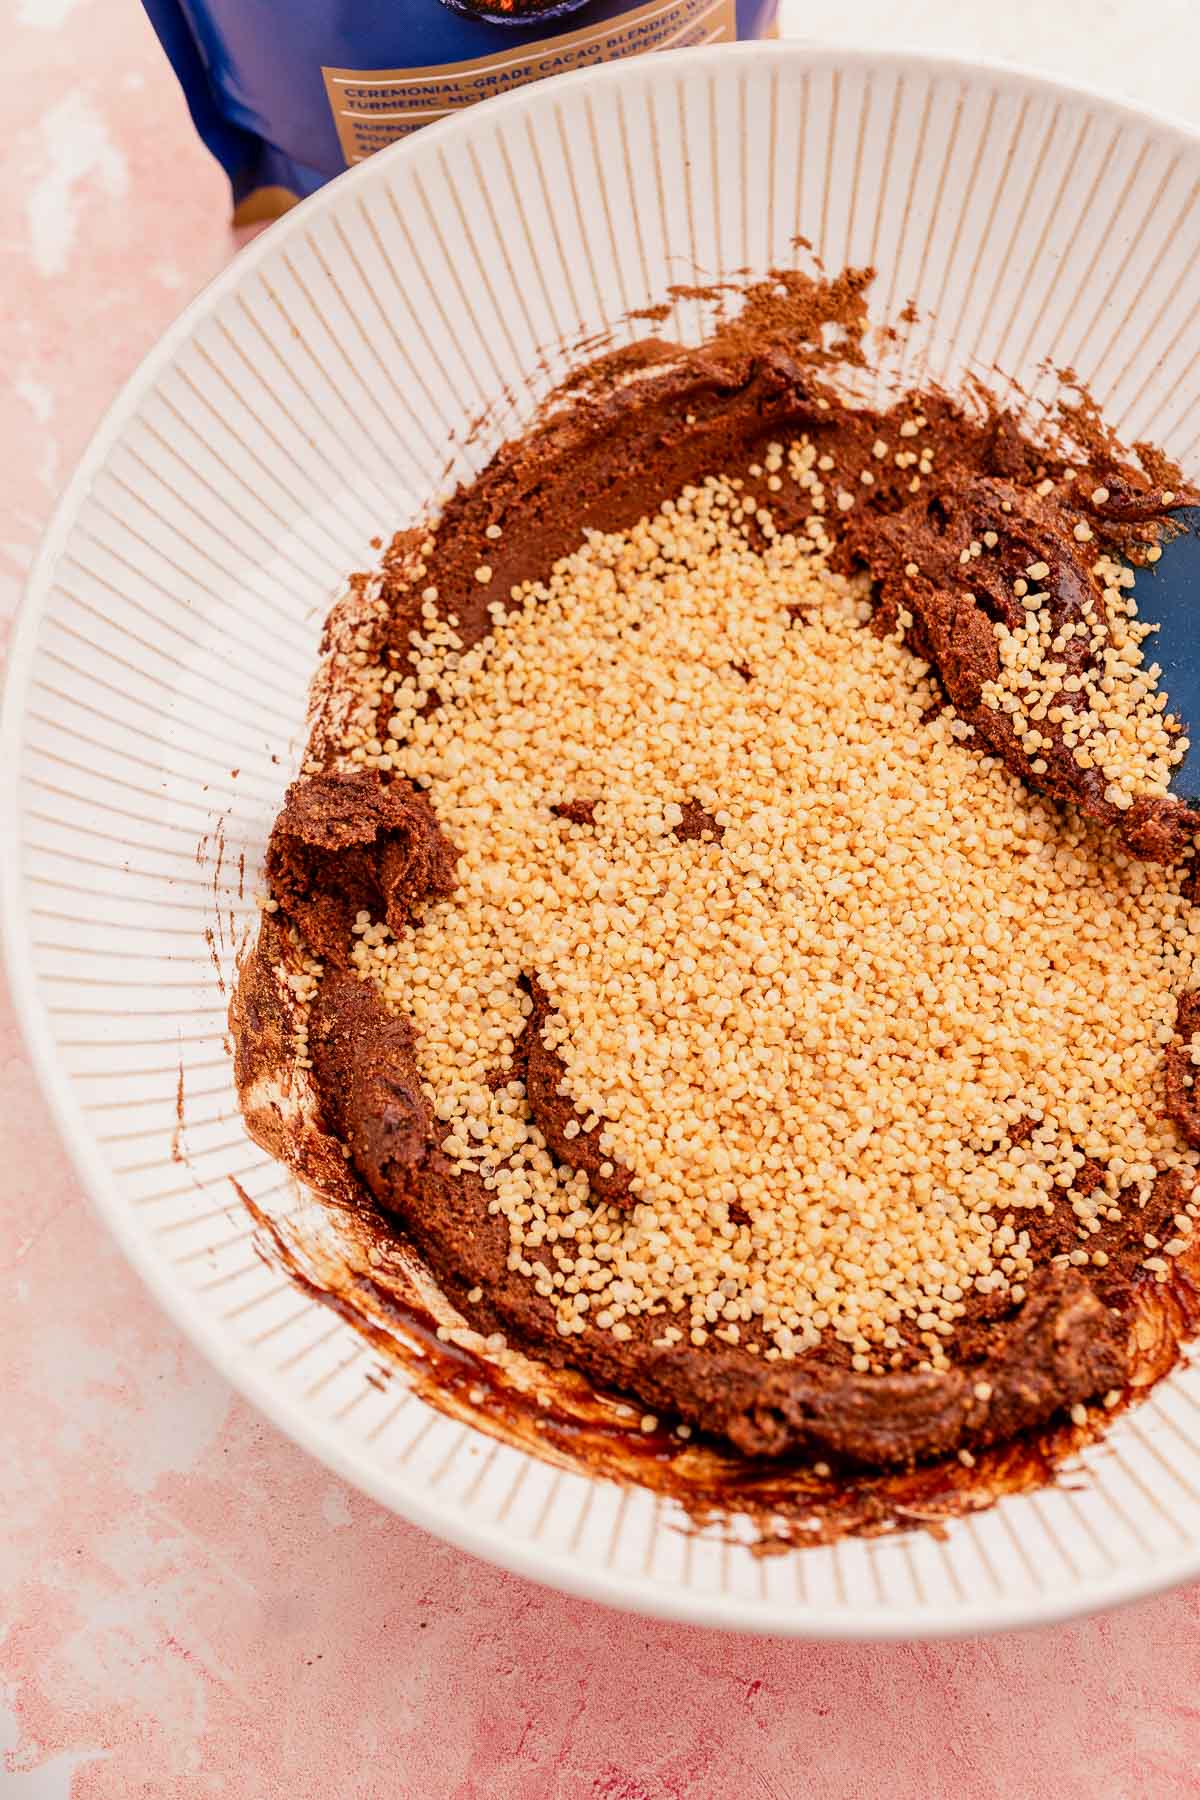 A bowl containing a chocolate mixture with quinoa crunch bites sprinkled on top, resting on a pink surface, with a blue container partially visible.